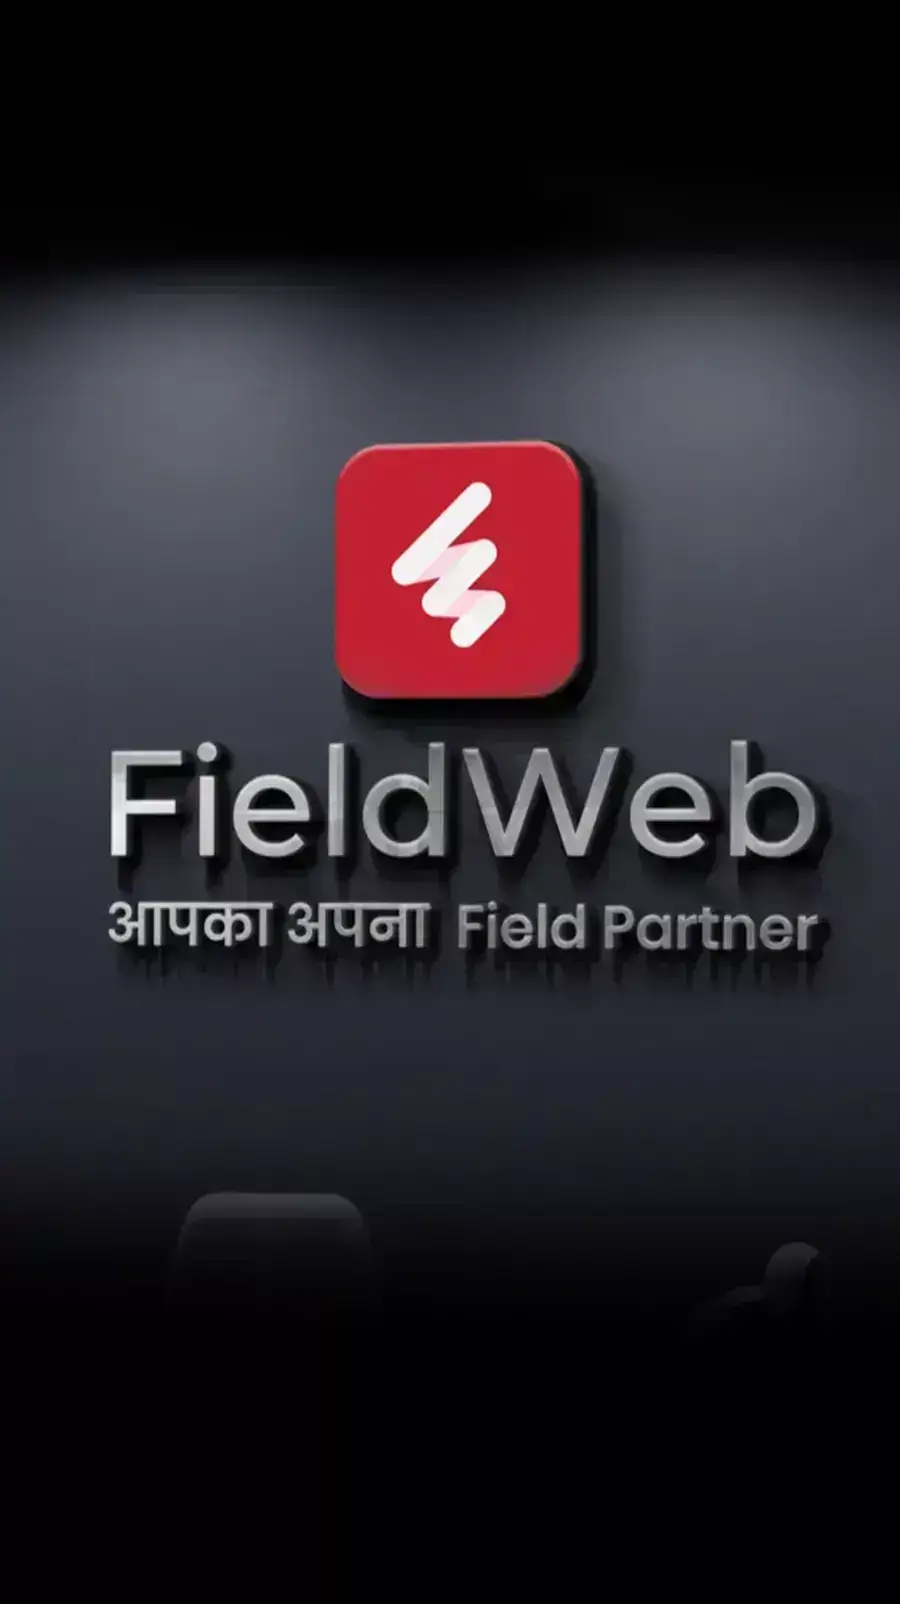 The FieldWeb logo features a red emblem with a white center, in gray wall also includes Hindi words, with a modern aesthetic.